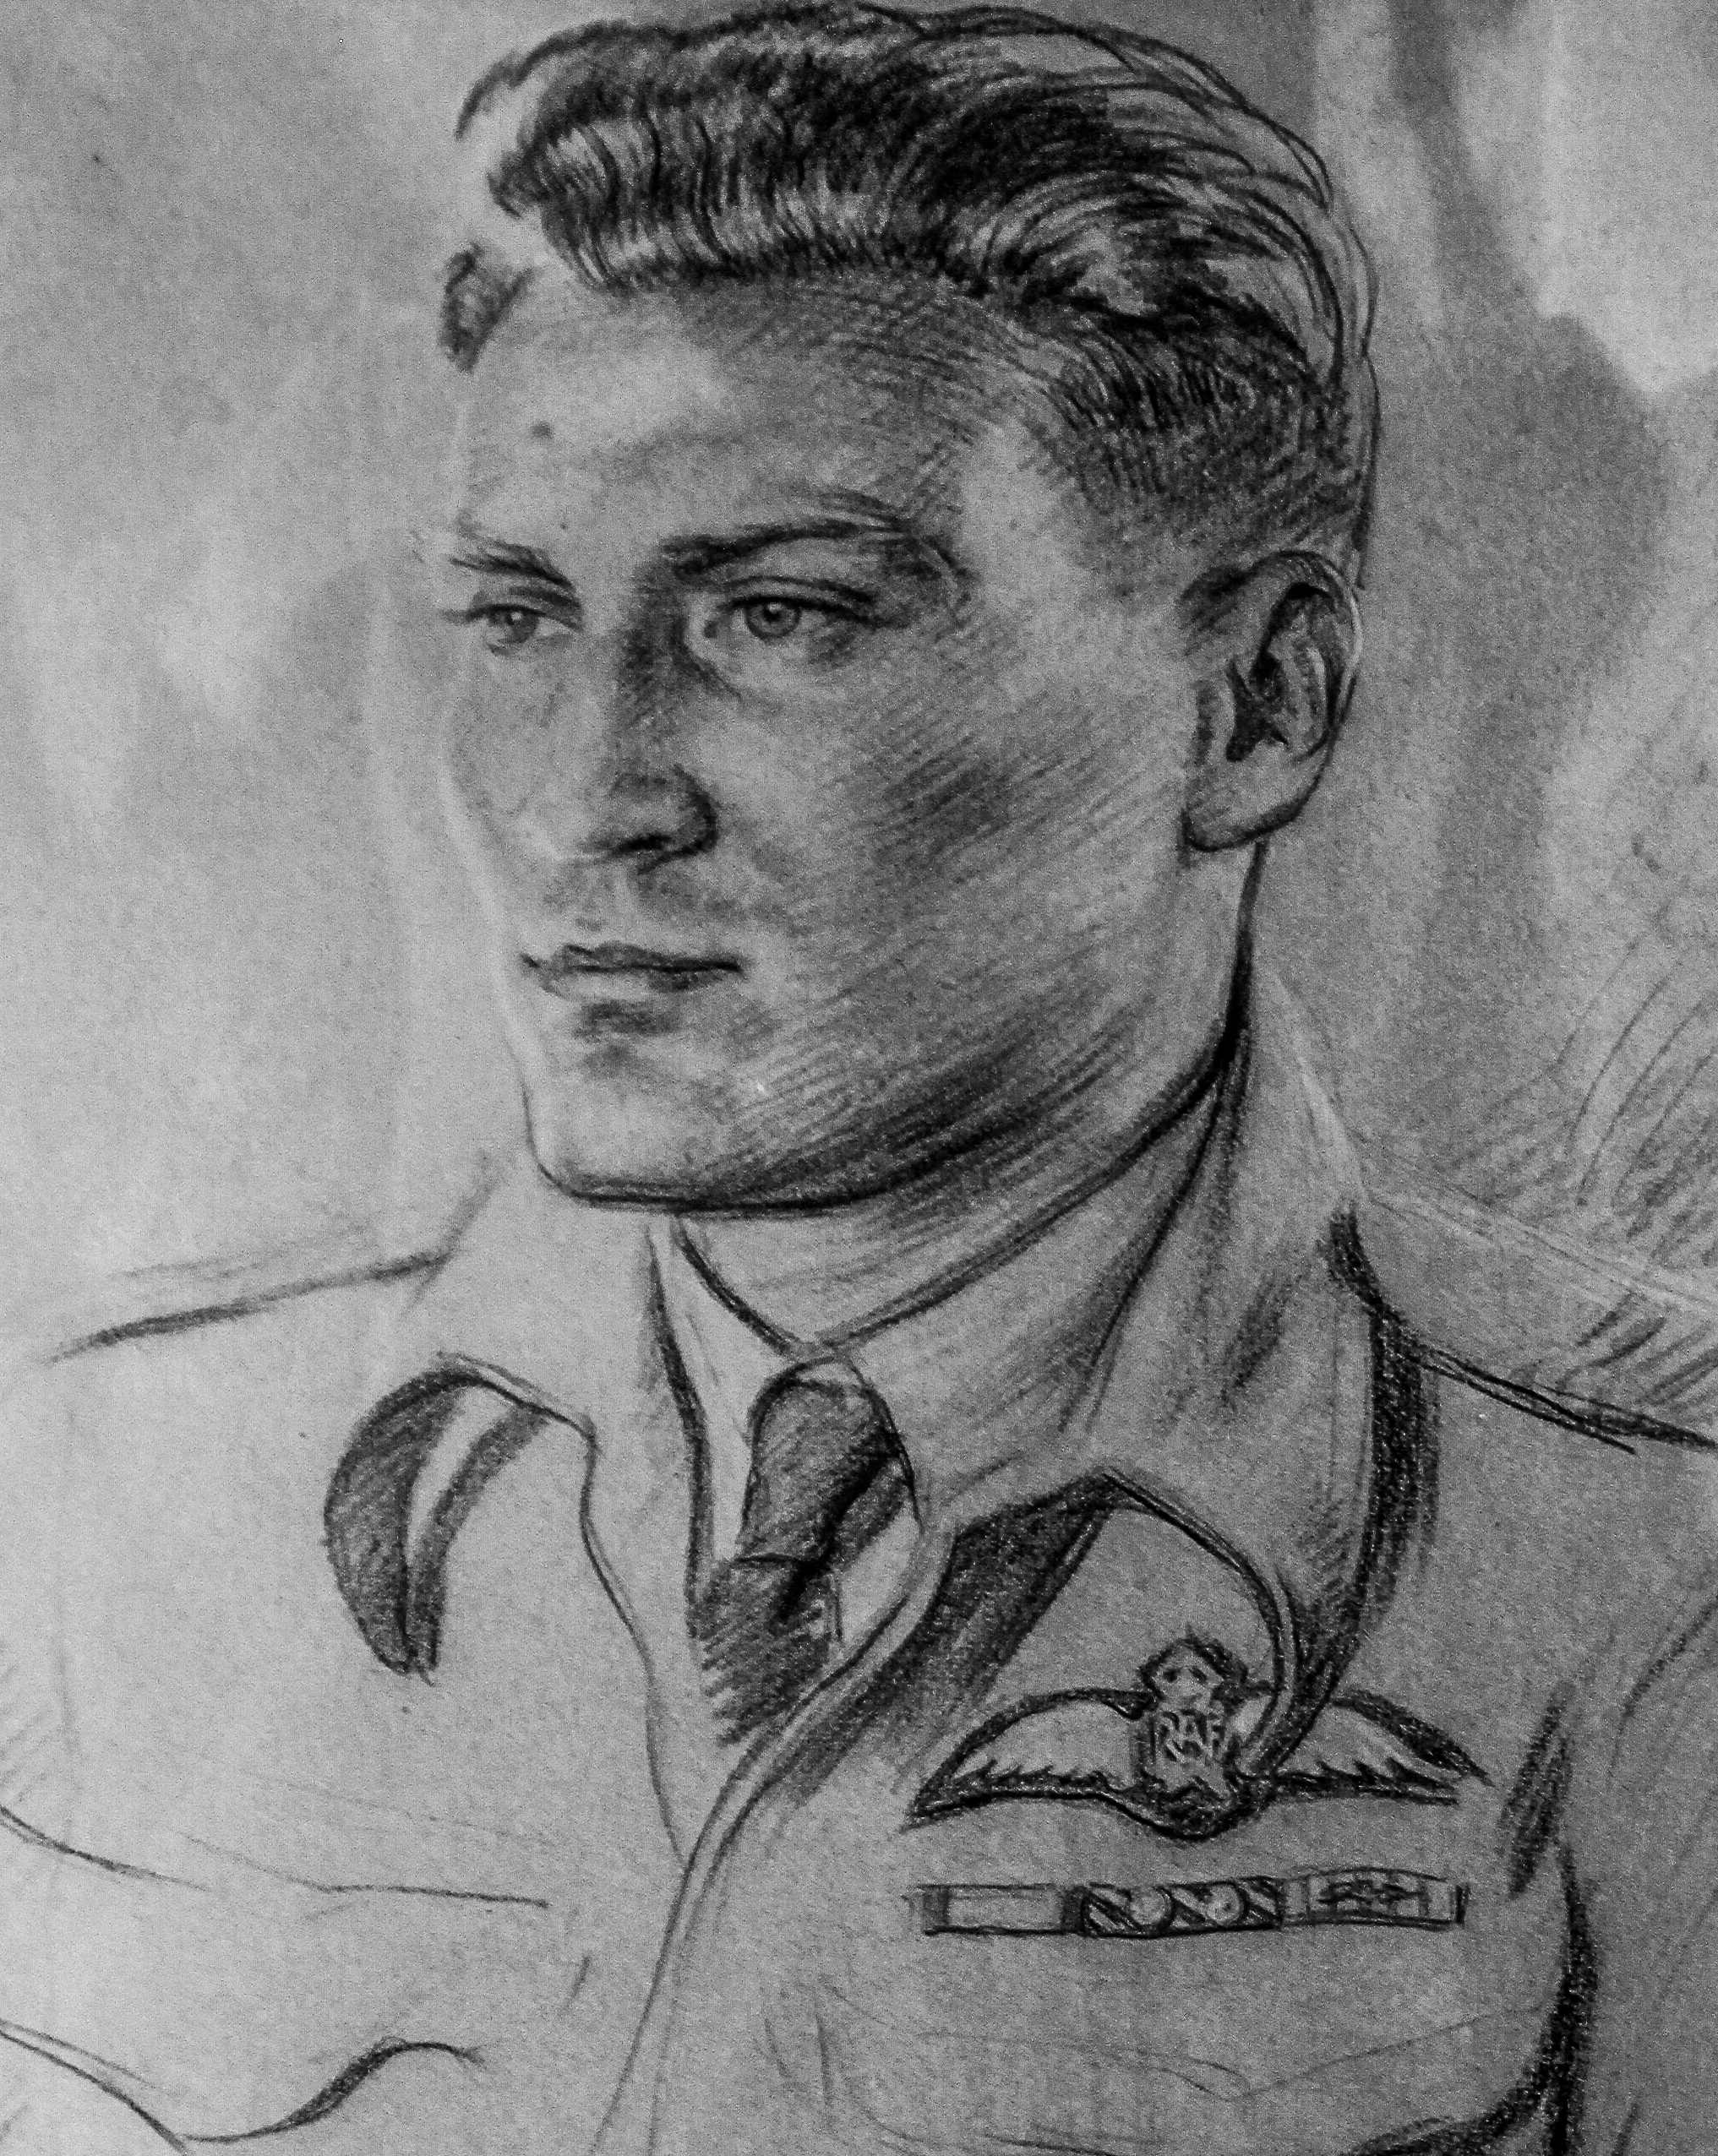 Group Captain Petrus (Dutch or Khaki) Hugo, in a portrait sketch on display at the Victoria West Museum. Image: Supplied by Chris Marais